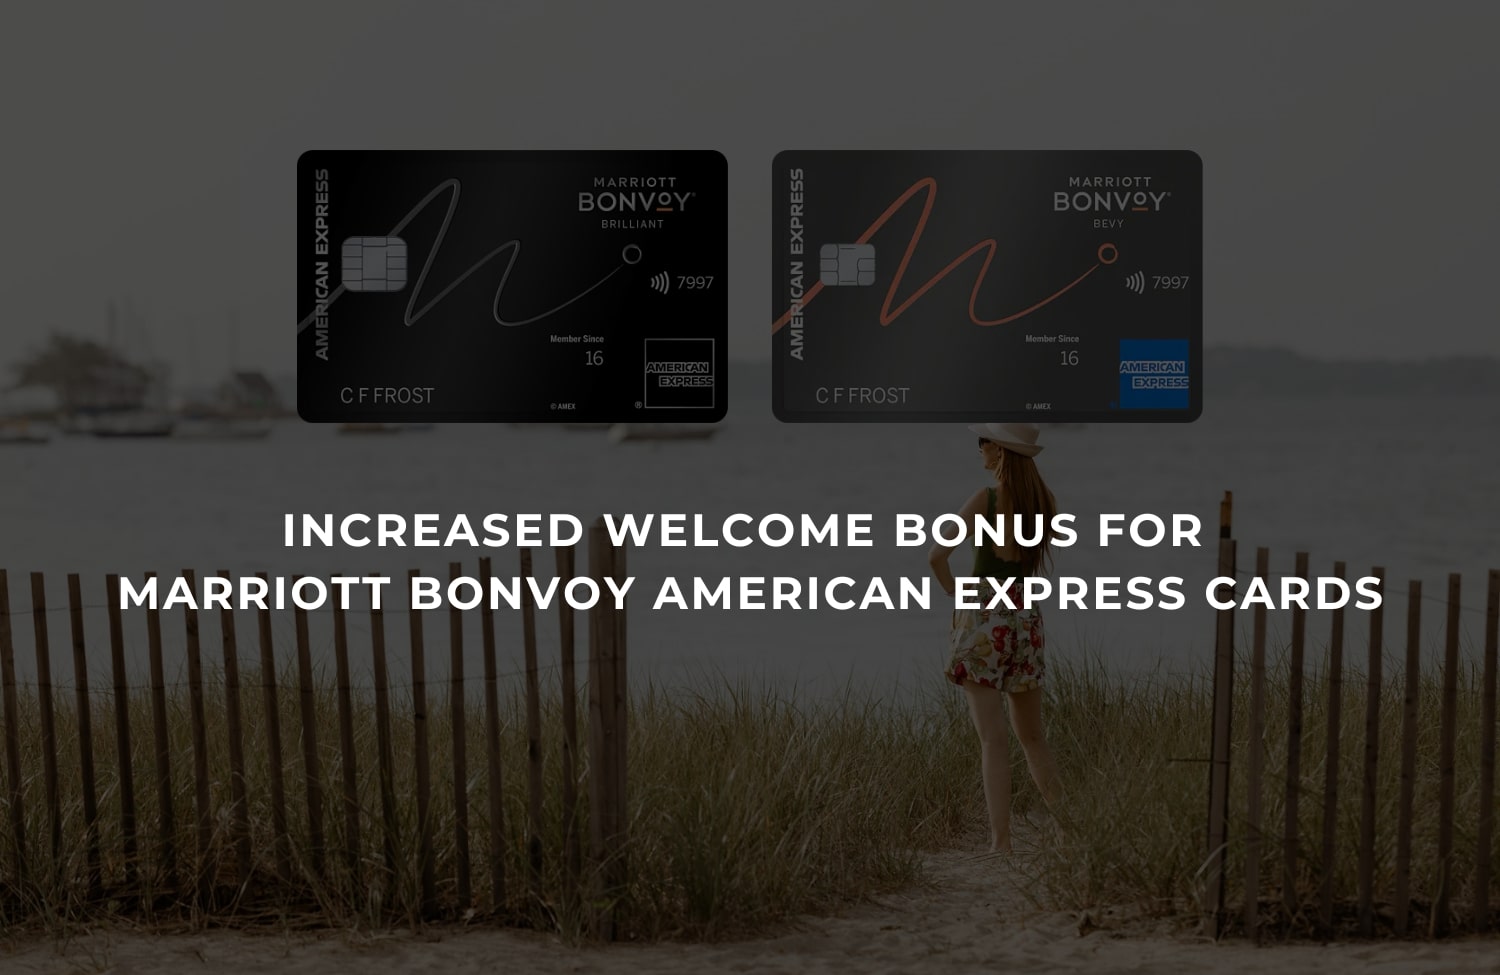 Increased welcome bonus for Marriott Bonvoy American Express cards